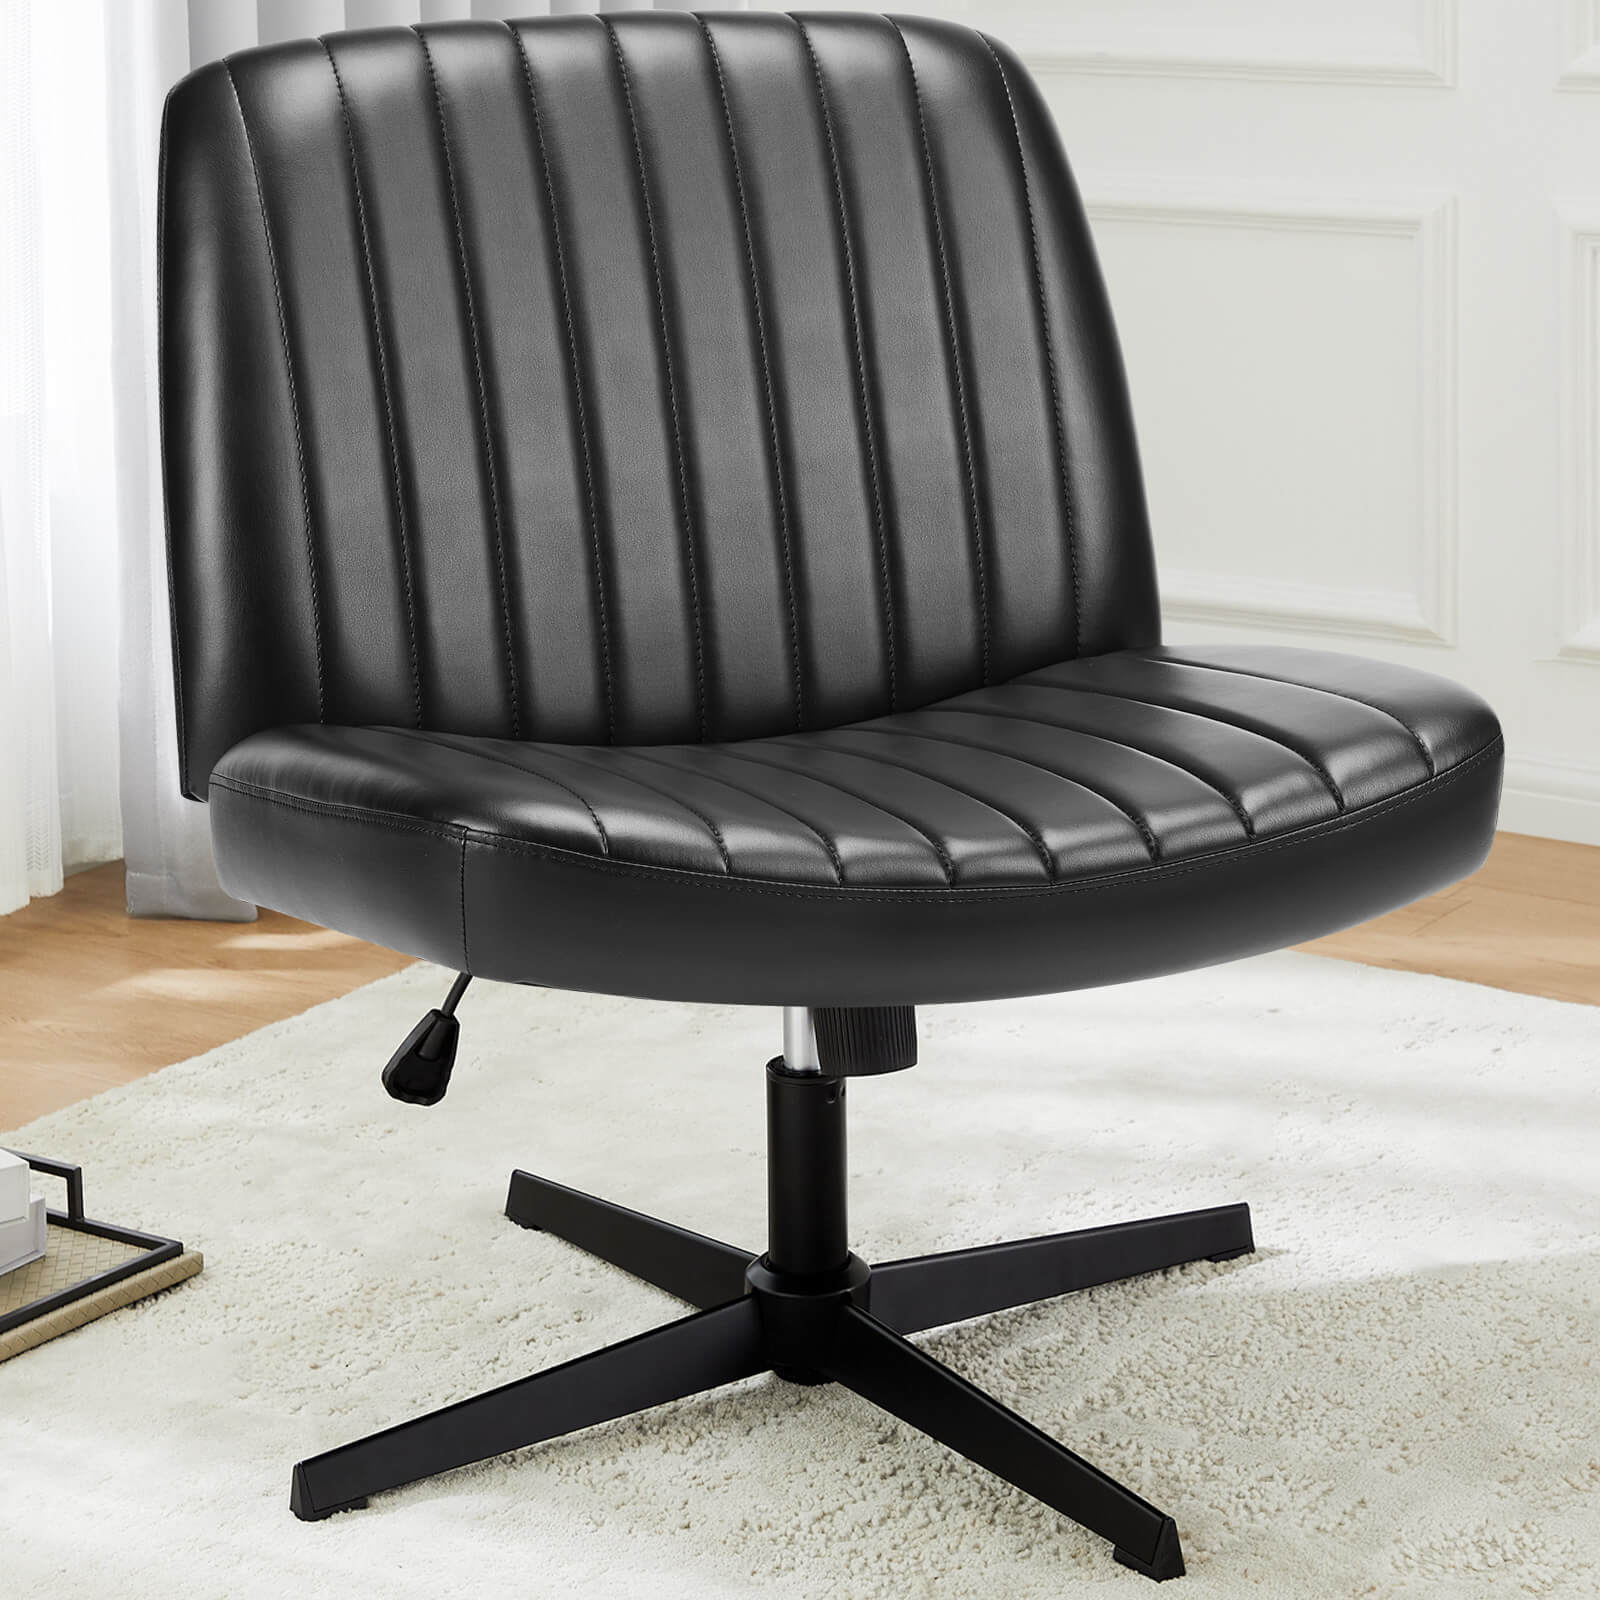 9 Criss Cross Chairs That Will Take Away Your Back Pain – topsfordays